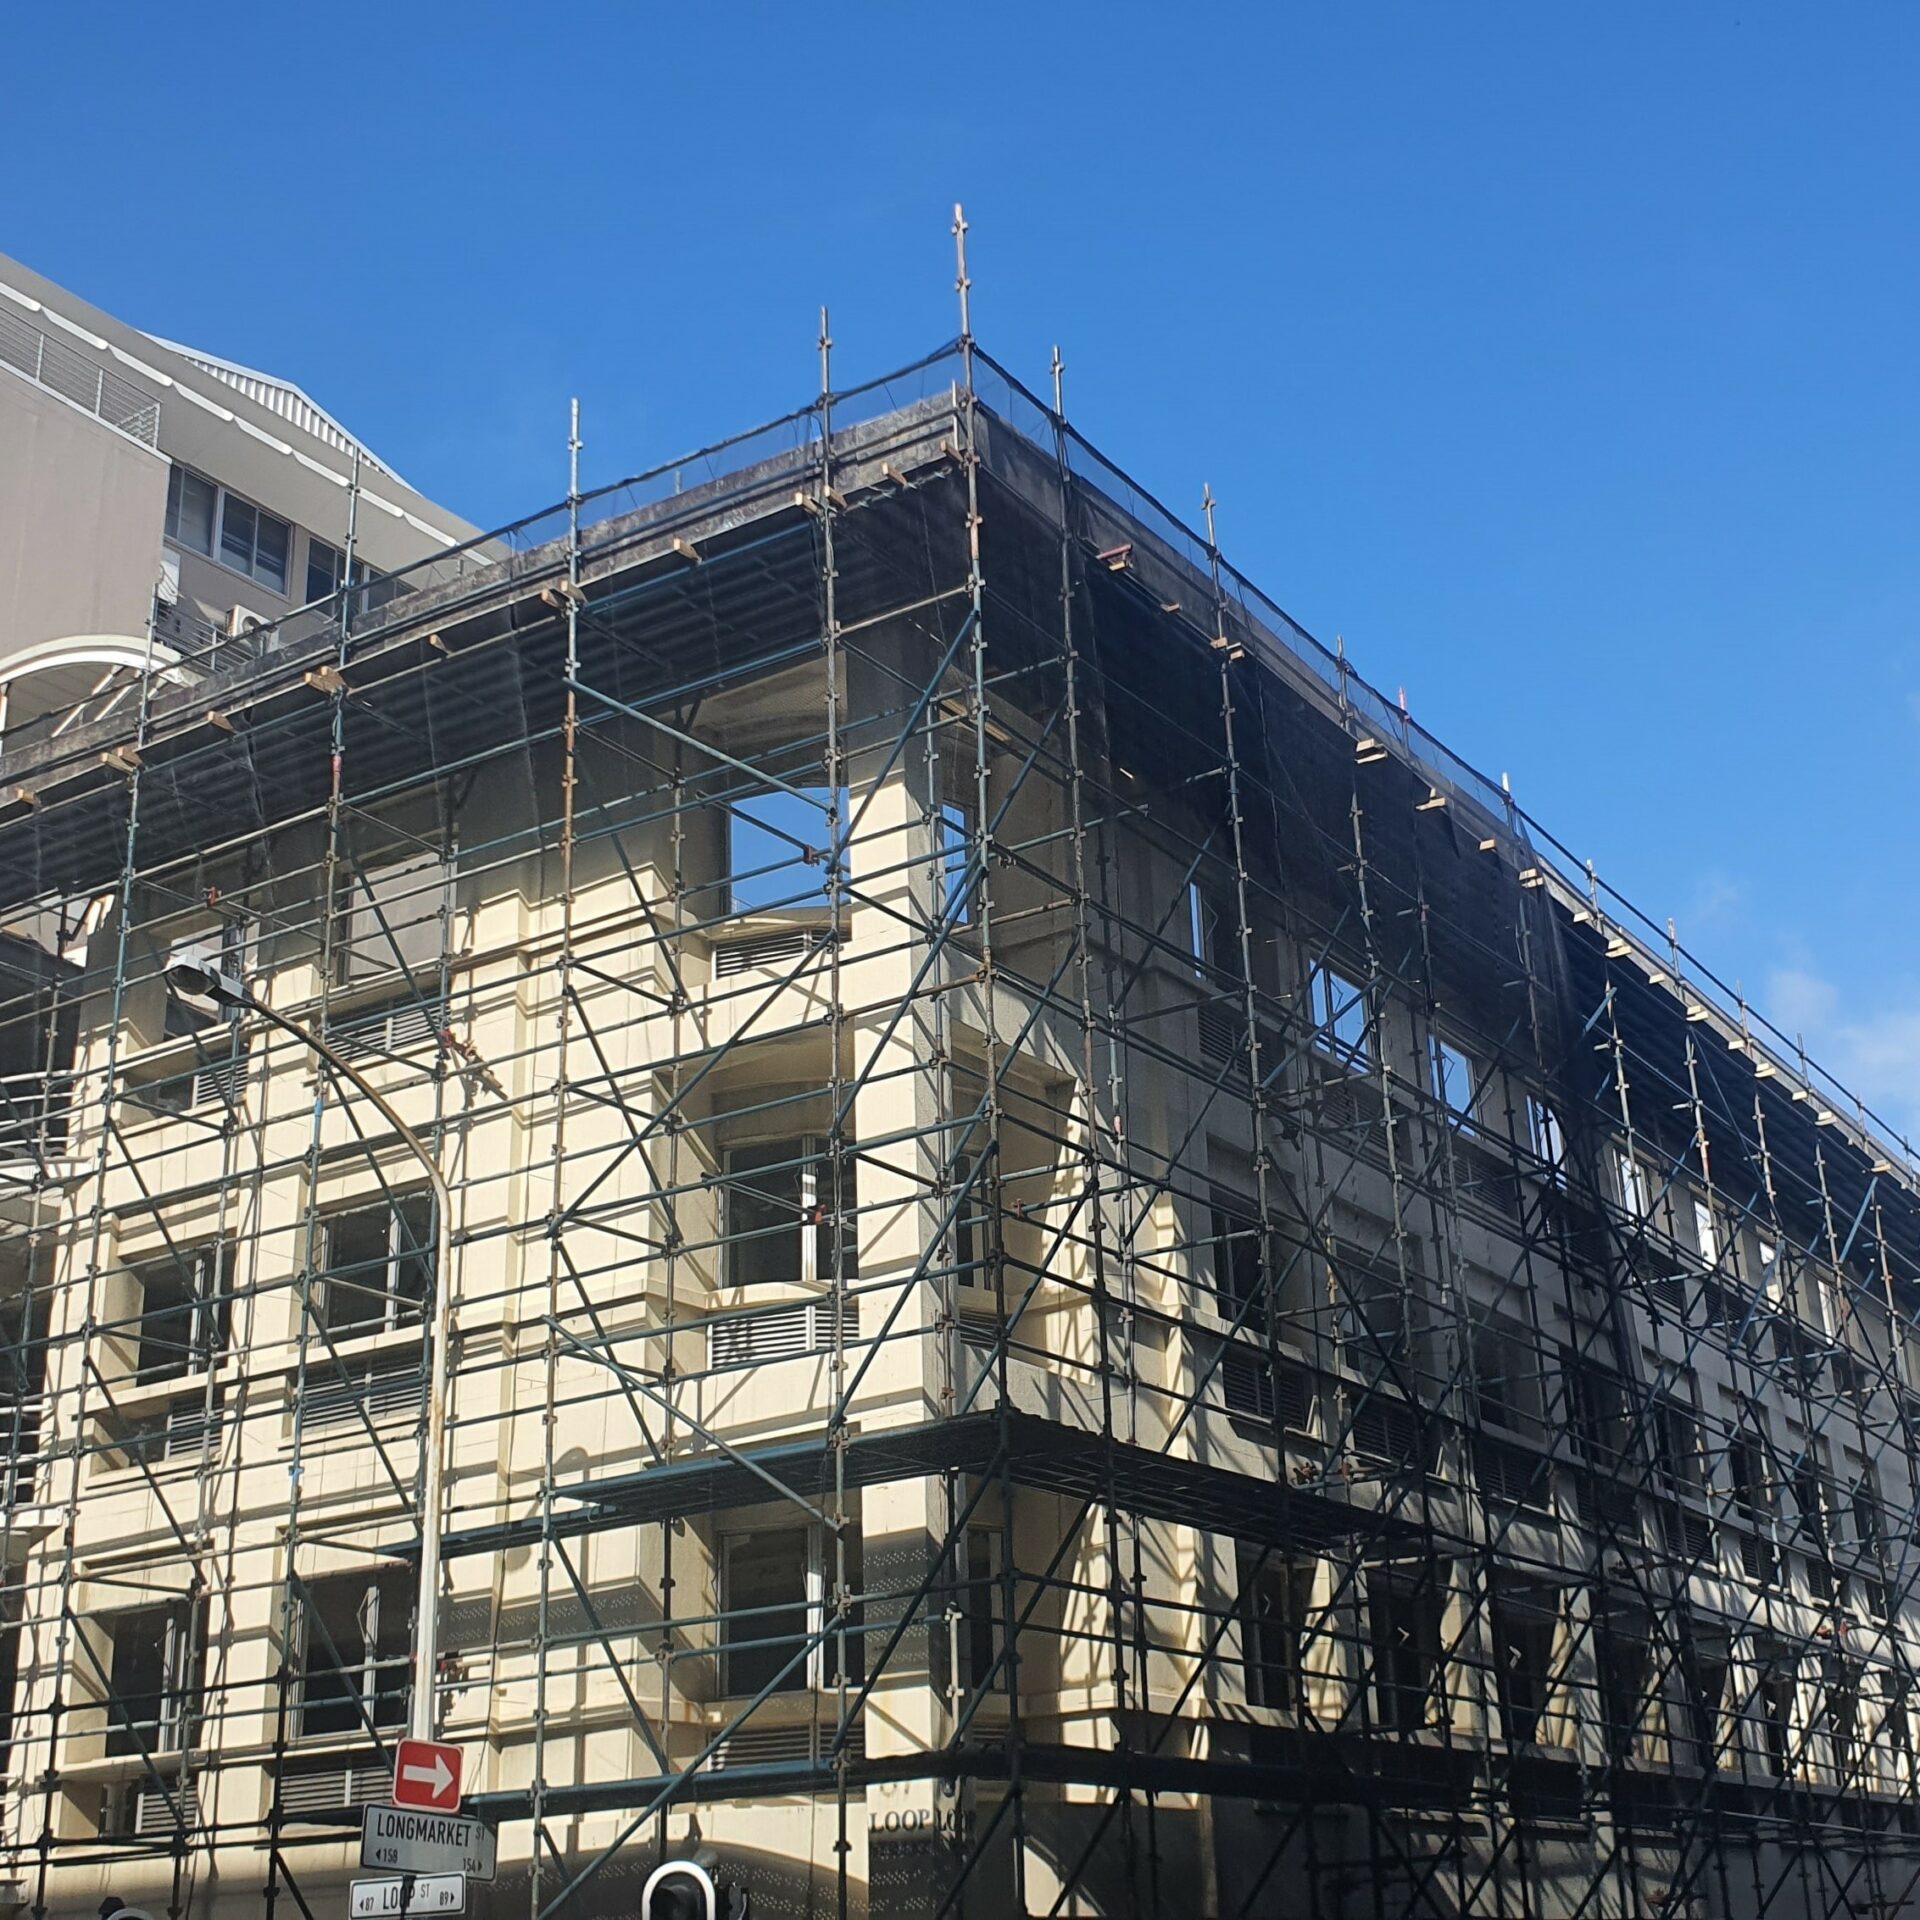 Client: Rawson Properties
Location: Loop Street, Cape Town
Access/crash deck scaffolding fro demolition of the building